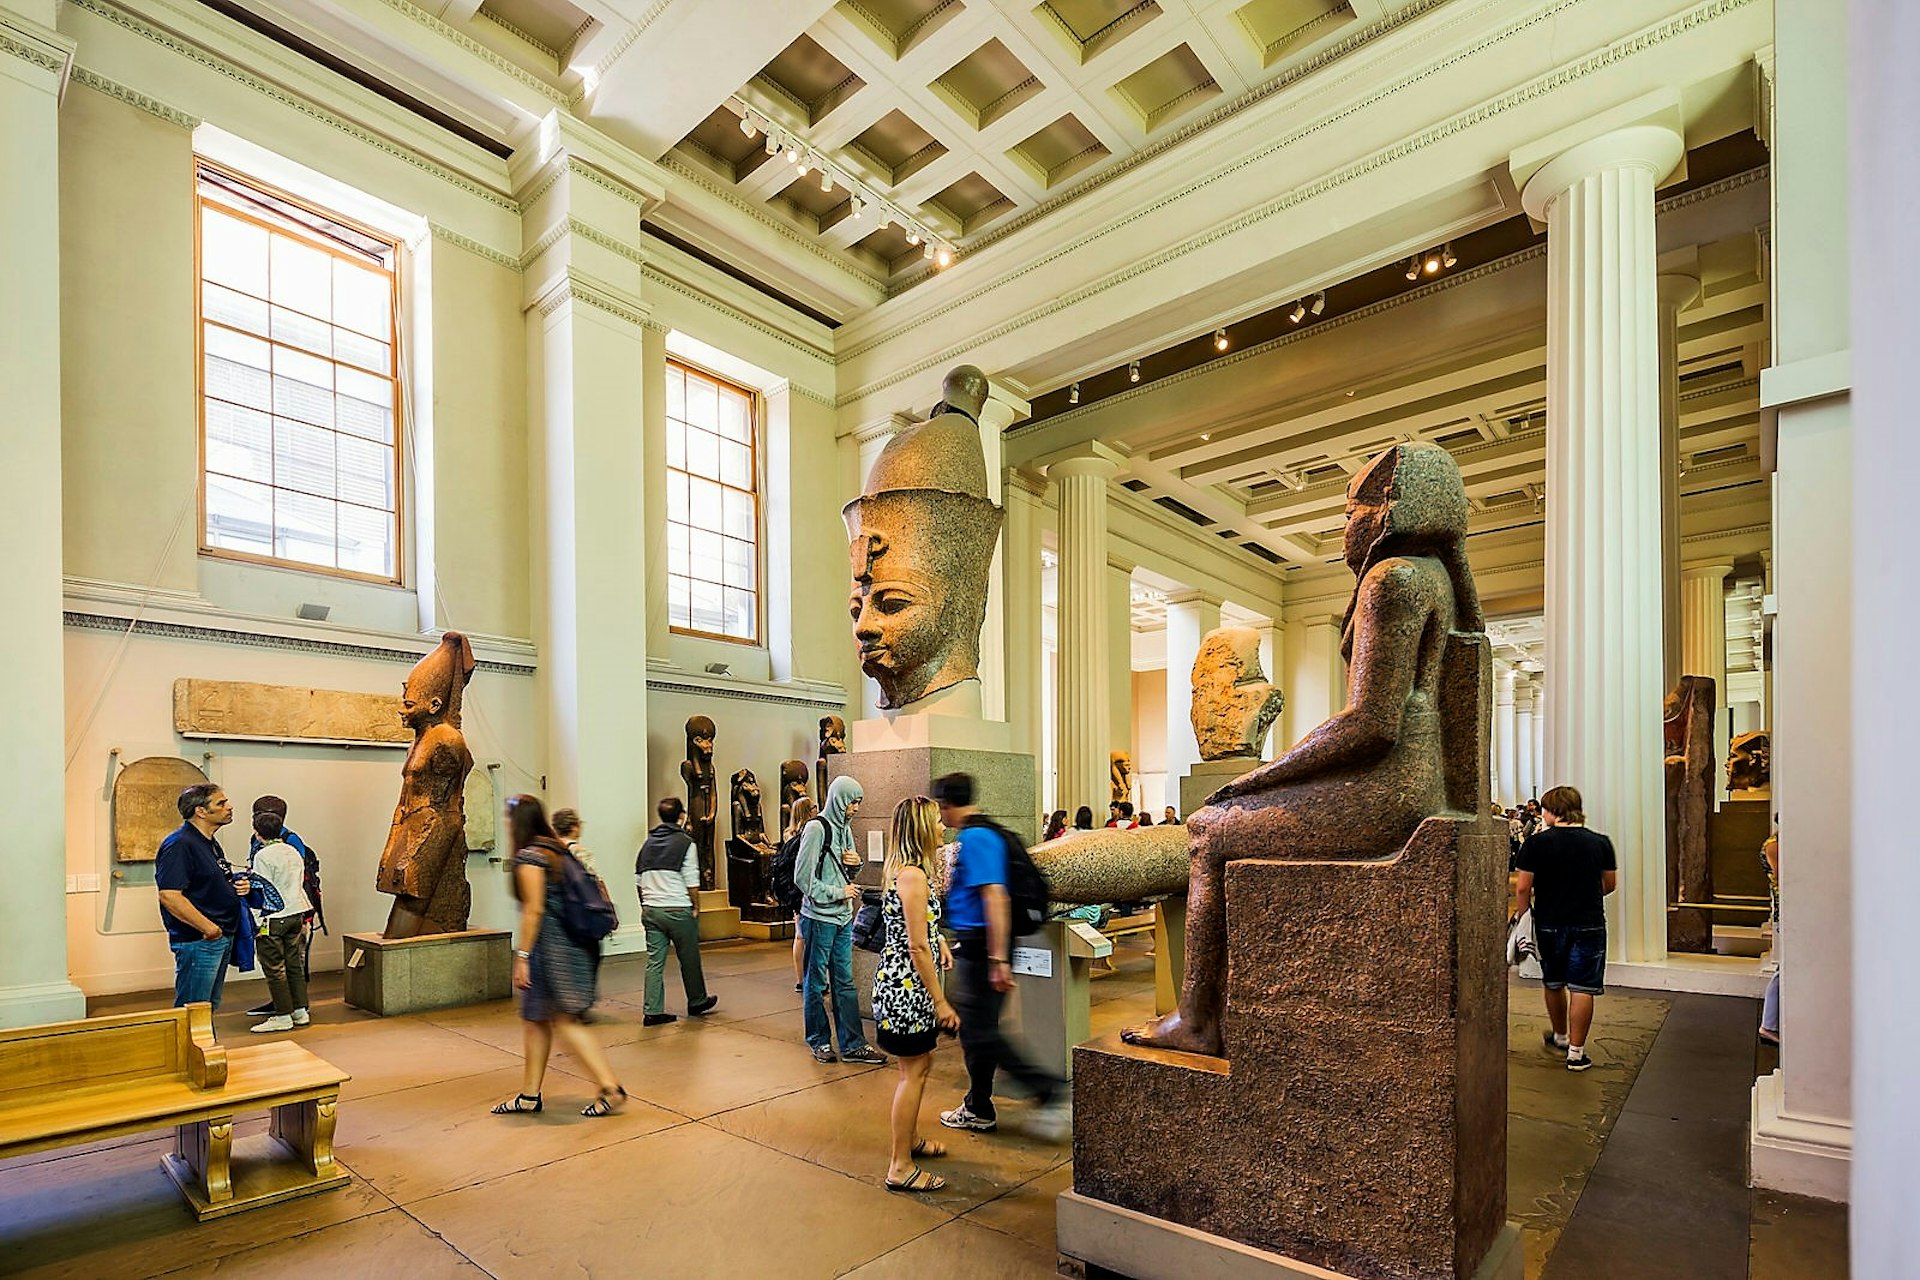 Visitors wander between statues in the British Museum's Egyptian sculpture gallery